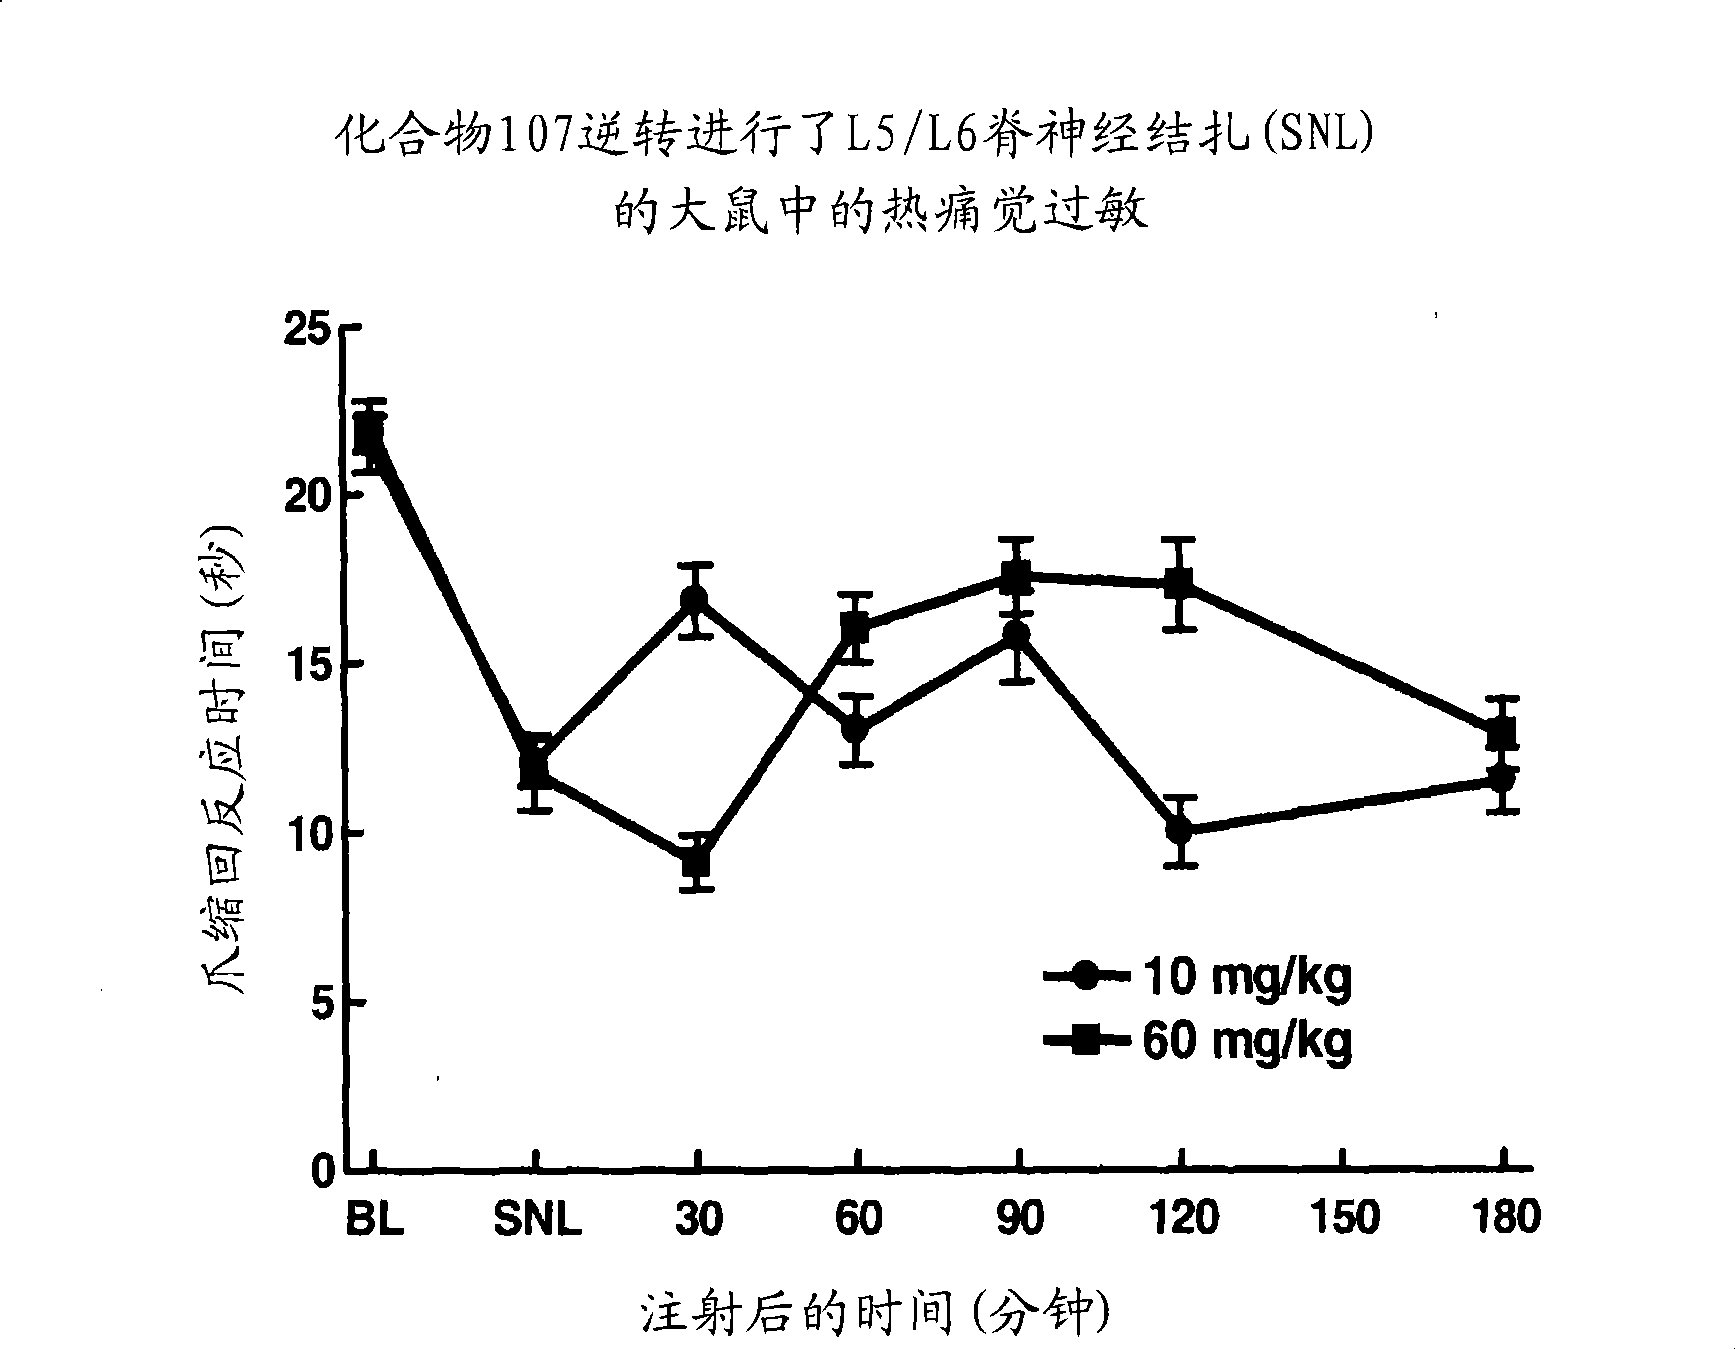 1,5 and 3,6- substituted indole compounds having NOS inhibitory activity